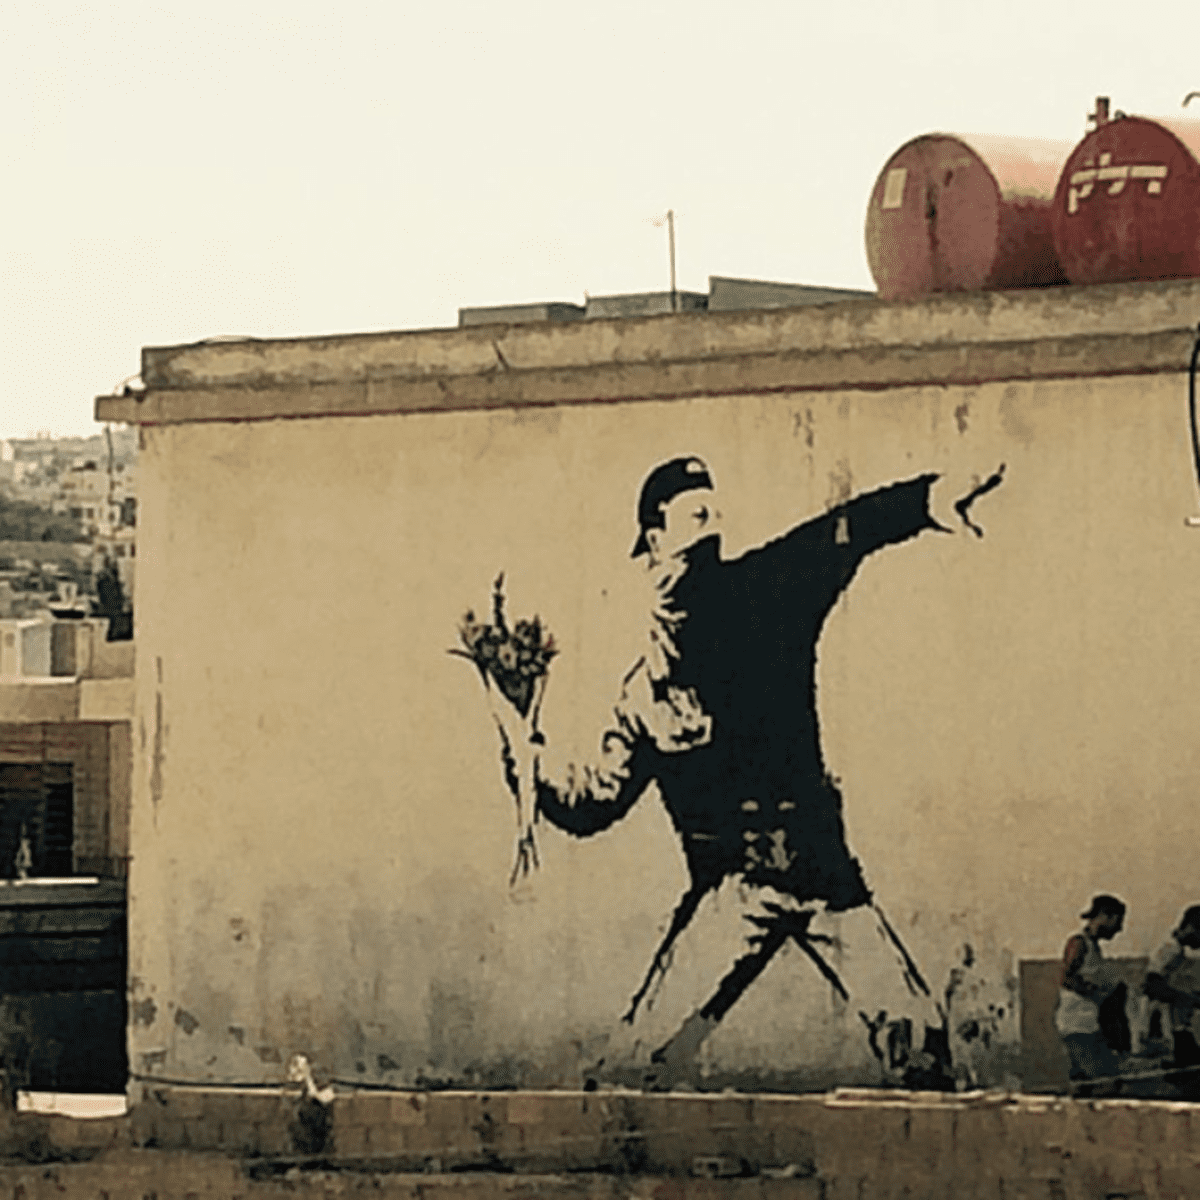 Who Is Banksy? Banksy's Real Identity Has Been Revealed By Science